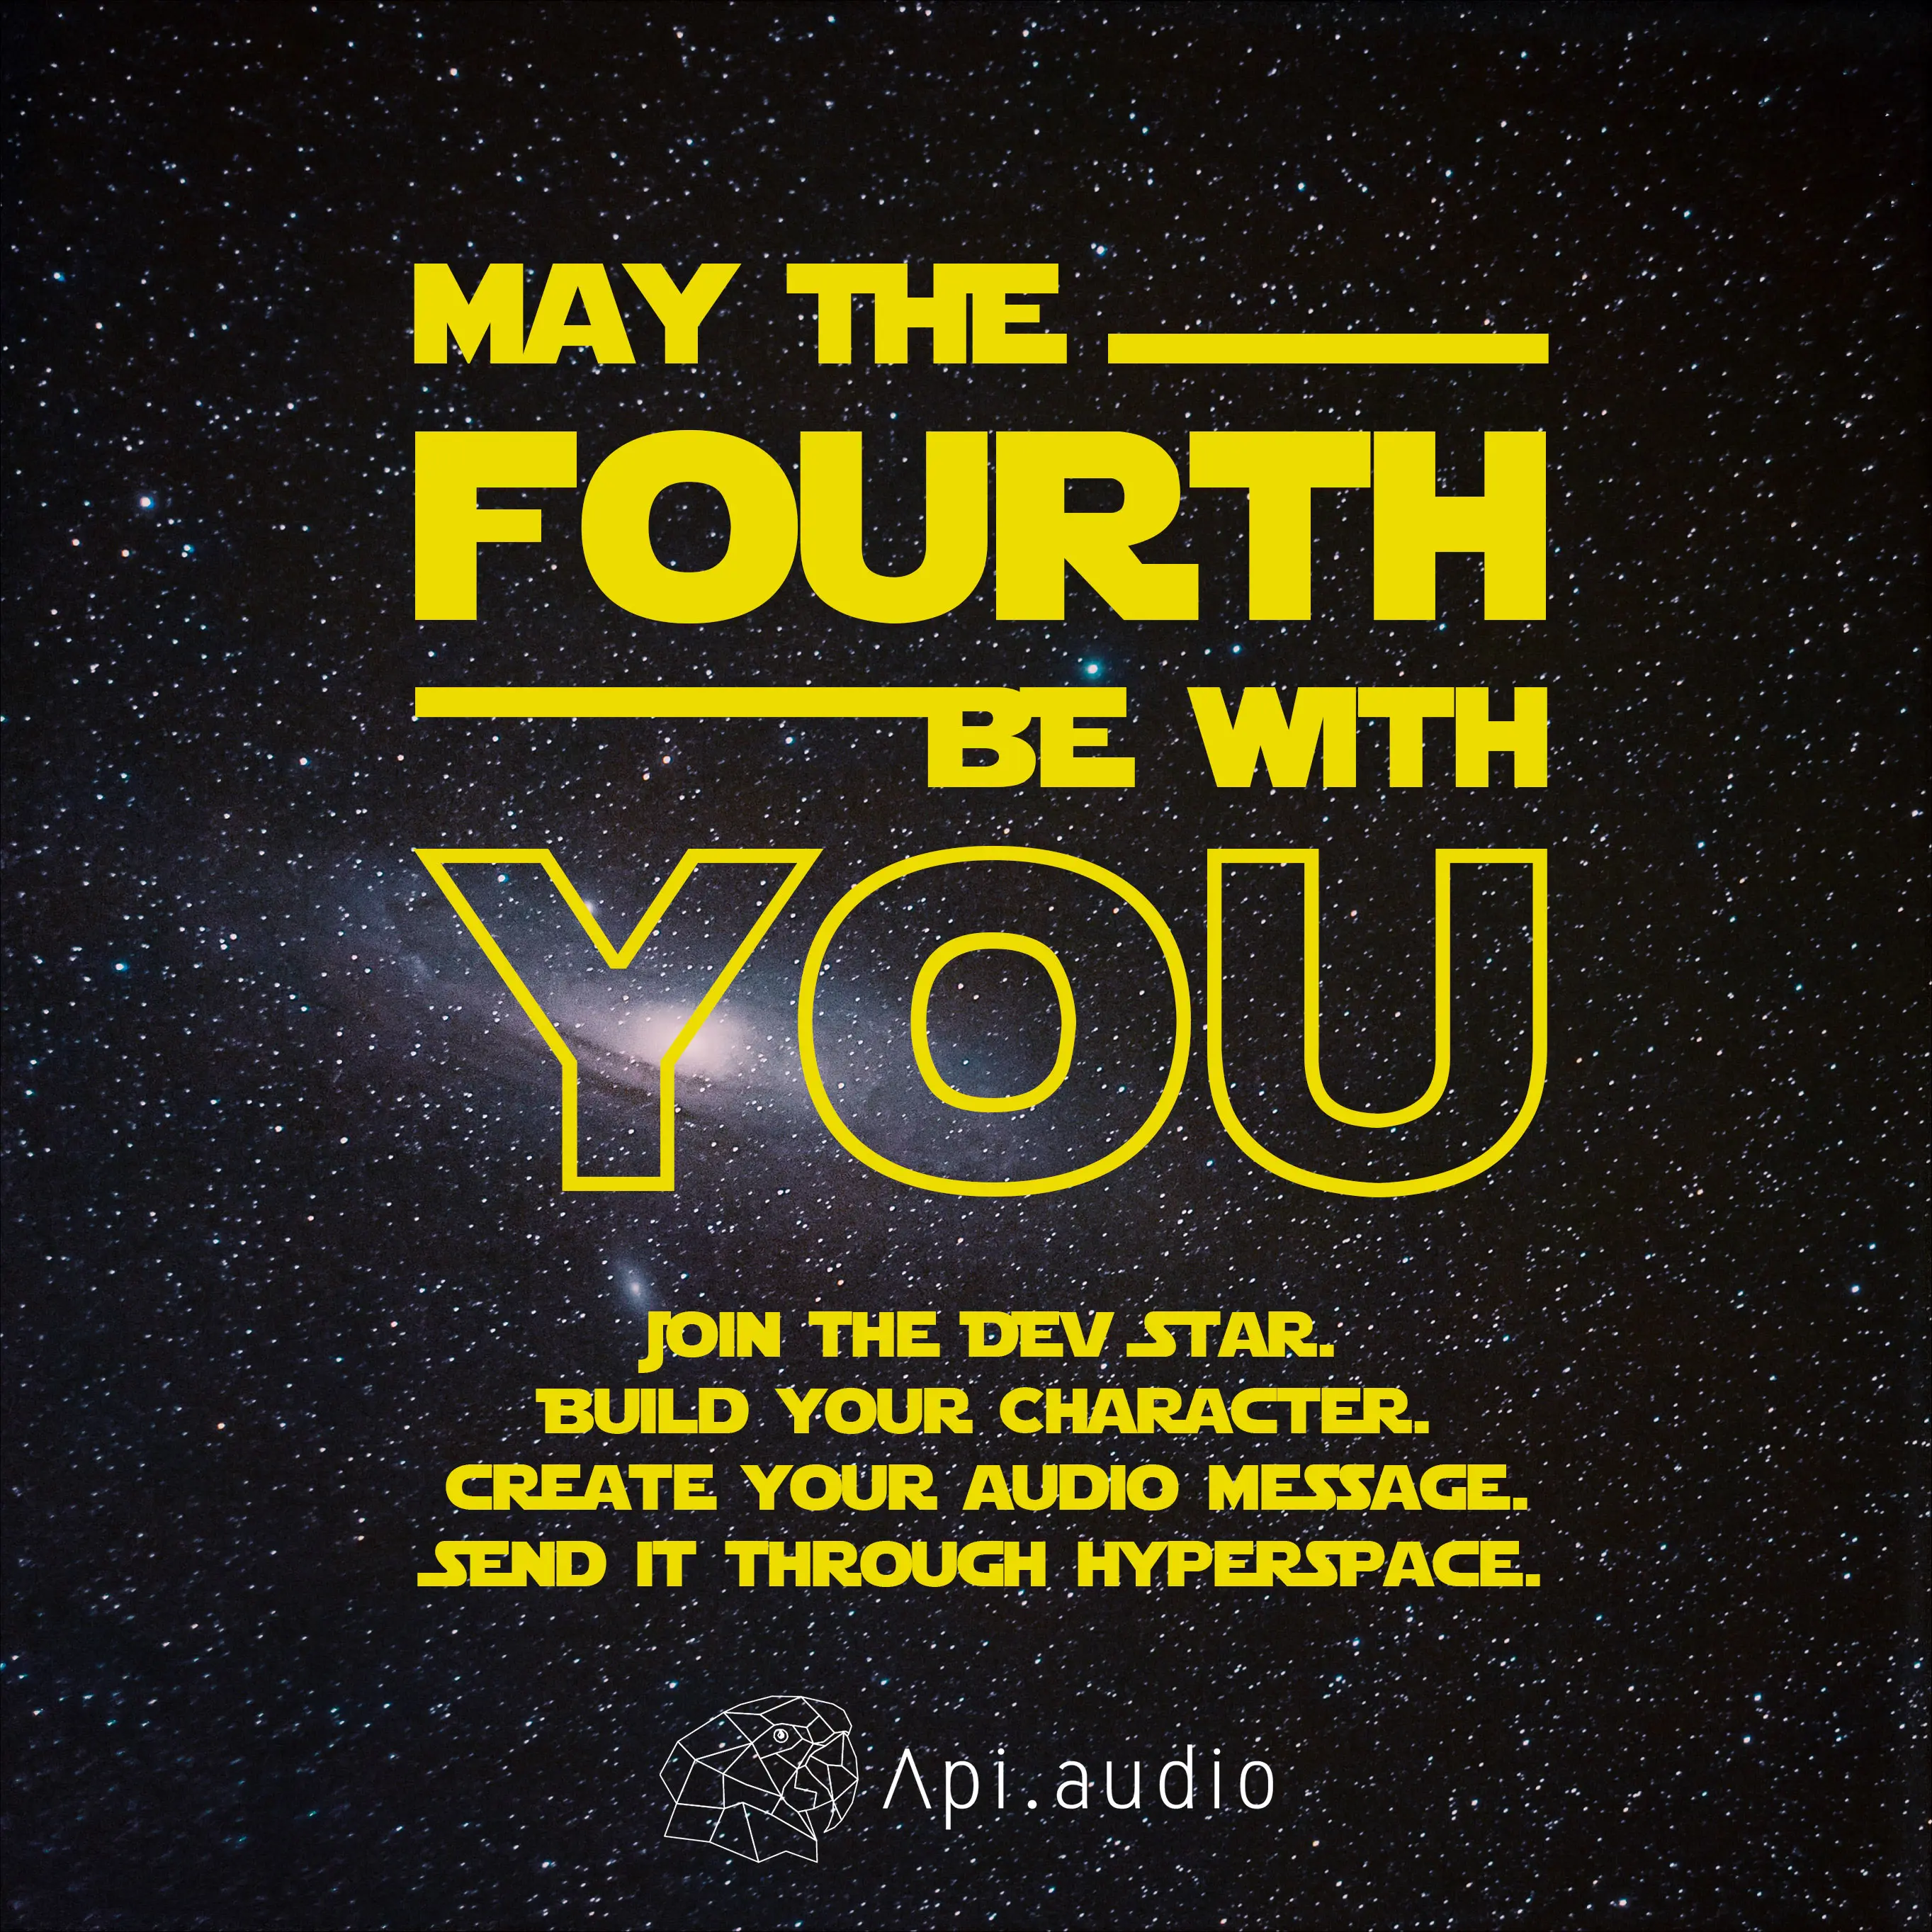 Let the Wookie speak! This is a fan project allowing you to create your own May the 4th greetings and send them through hyperspace. Learn the recipe and join the dev star.